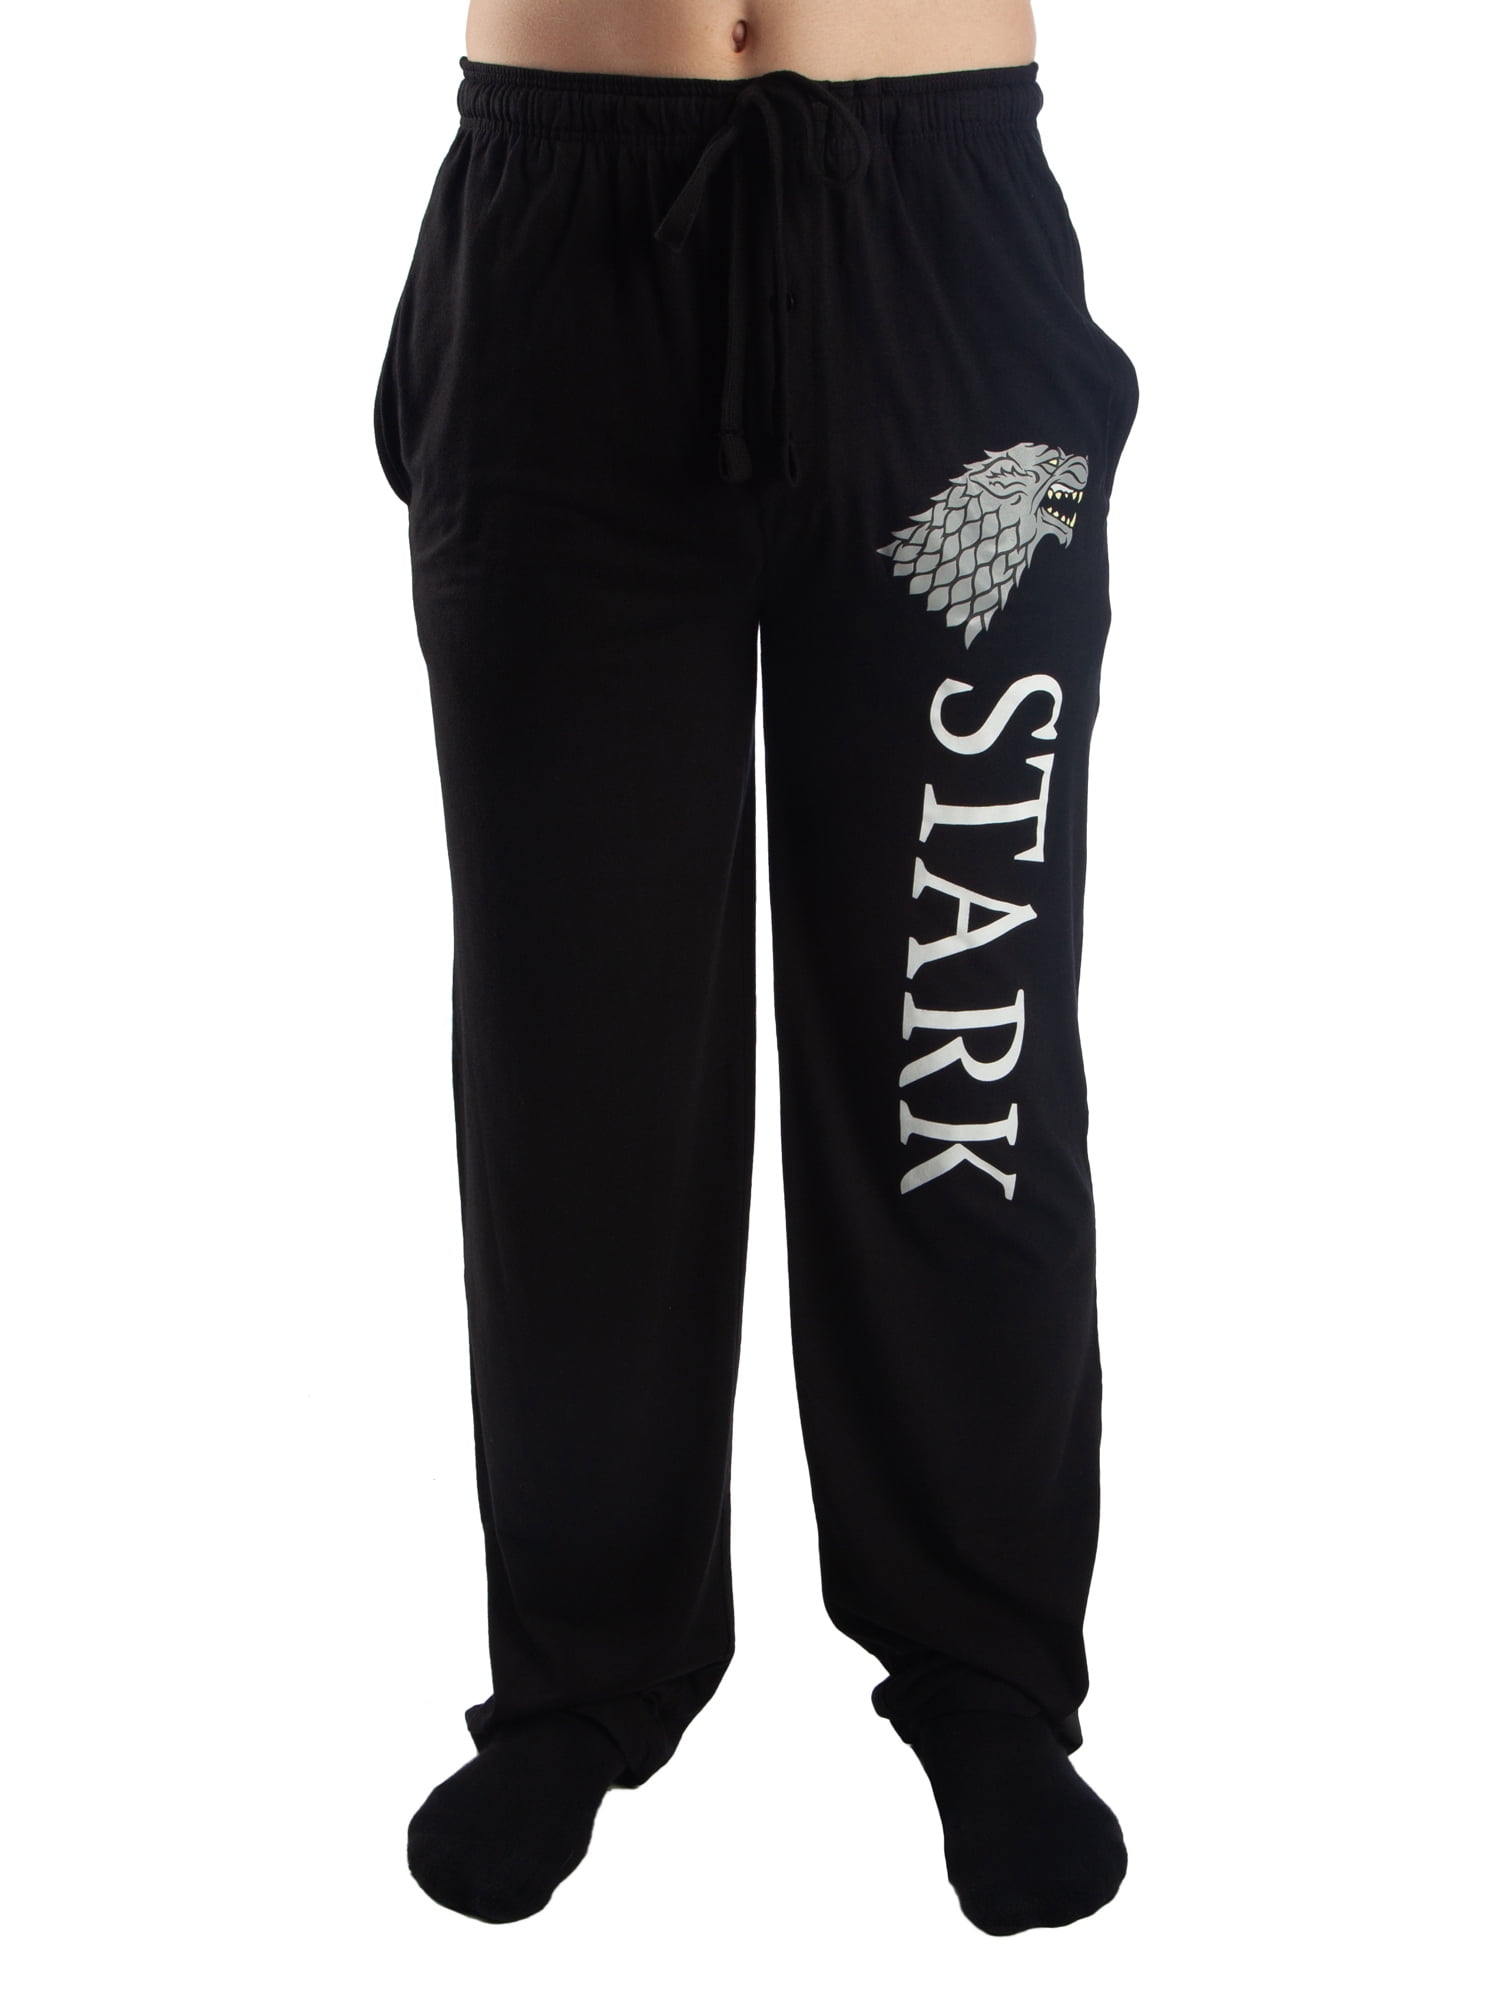 Game of Thrones Seven Kingdoms House Crests Lounge Pajama Pants Black L Rare New 